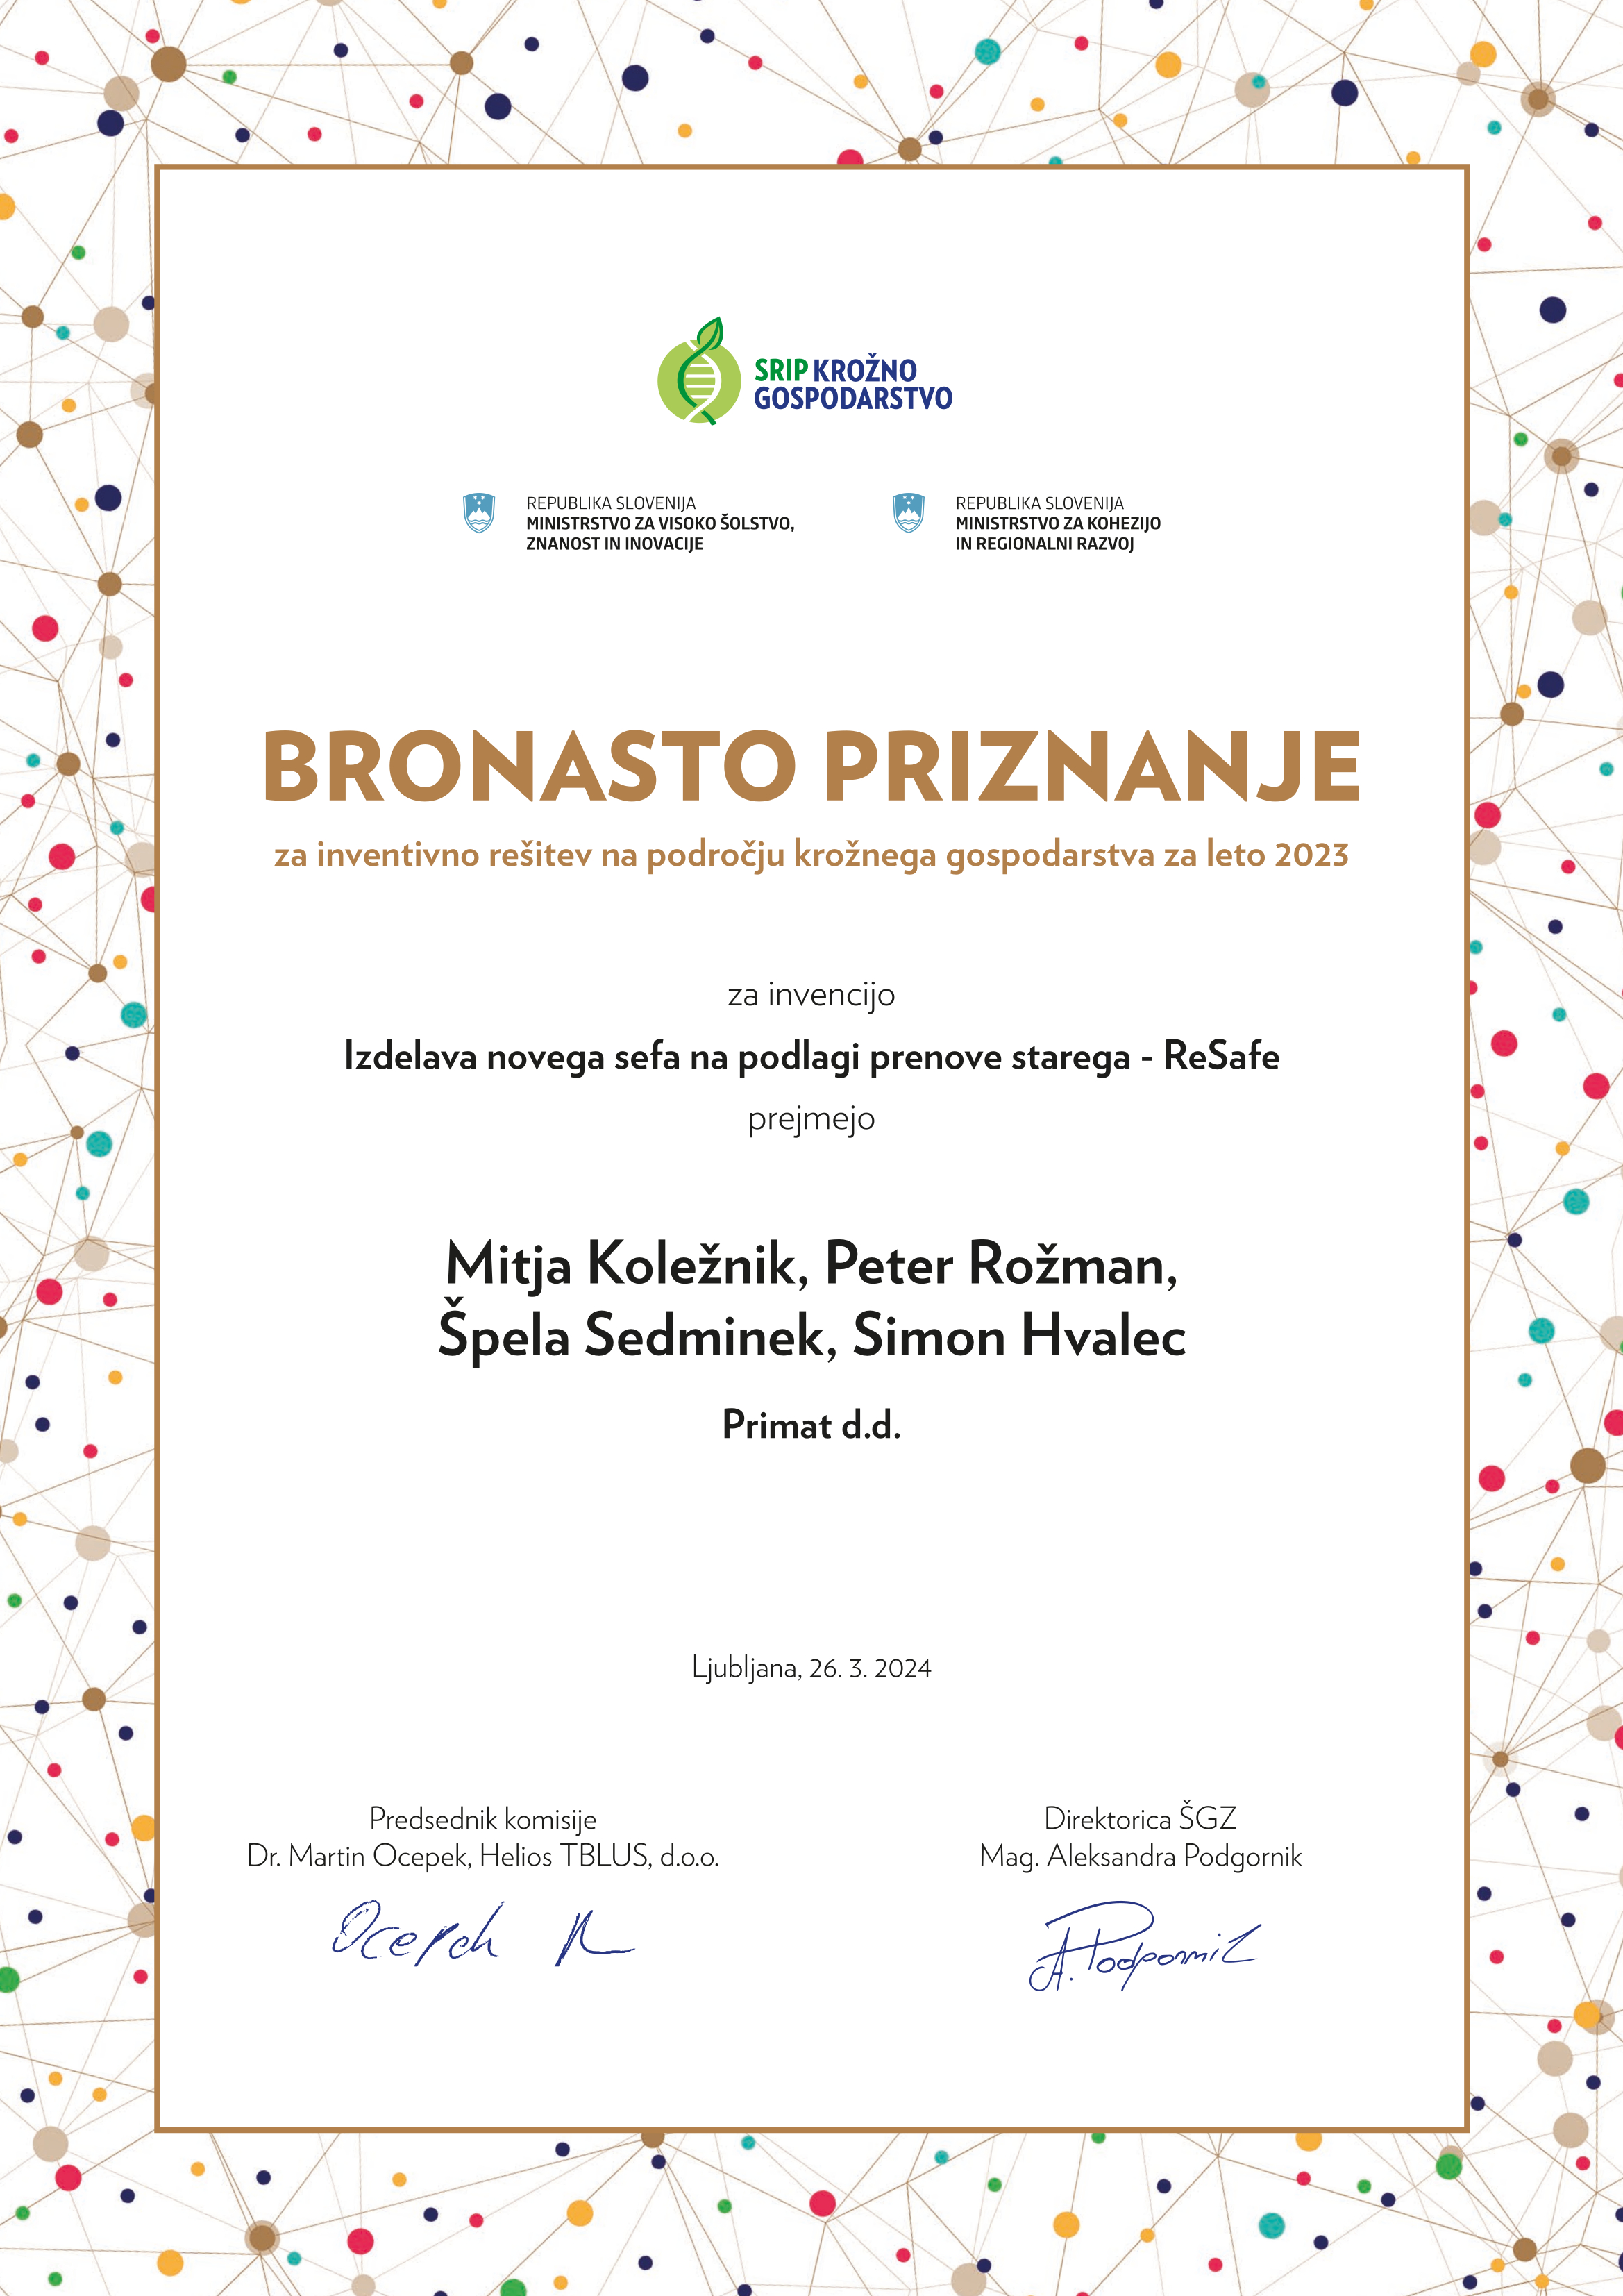 Bronze award for the invention of "Making a new safe based on the renovation of the old – ReSafe"